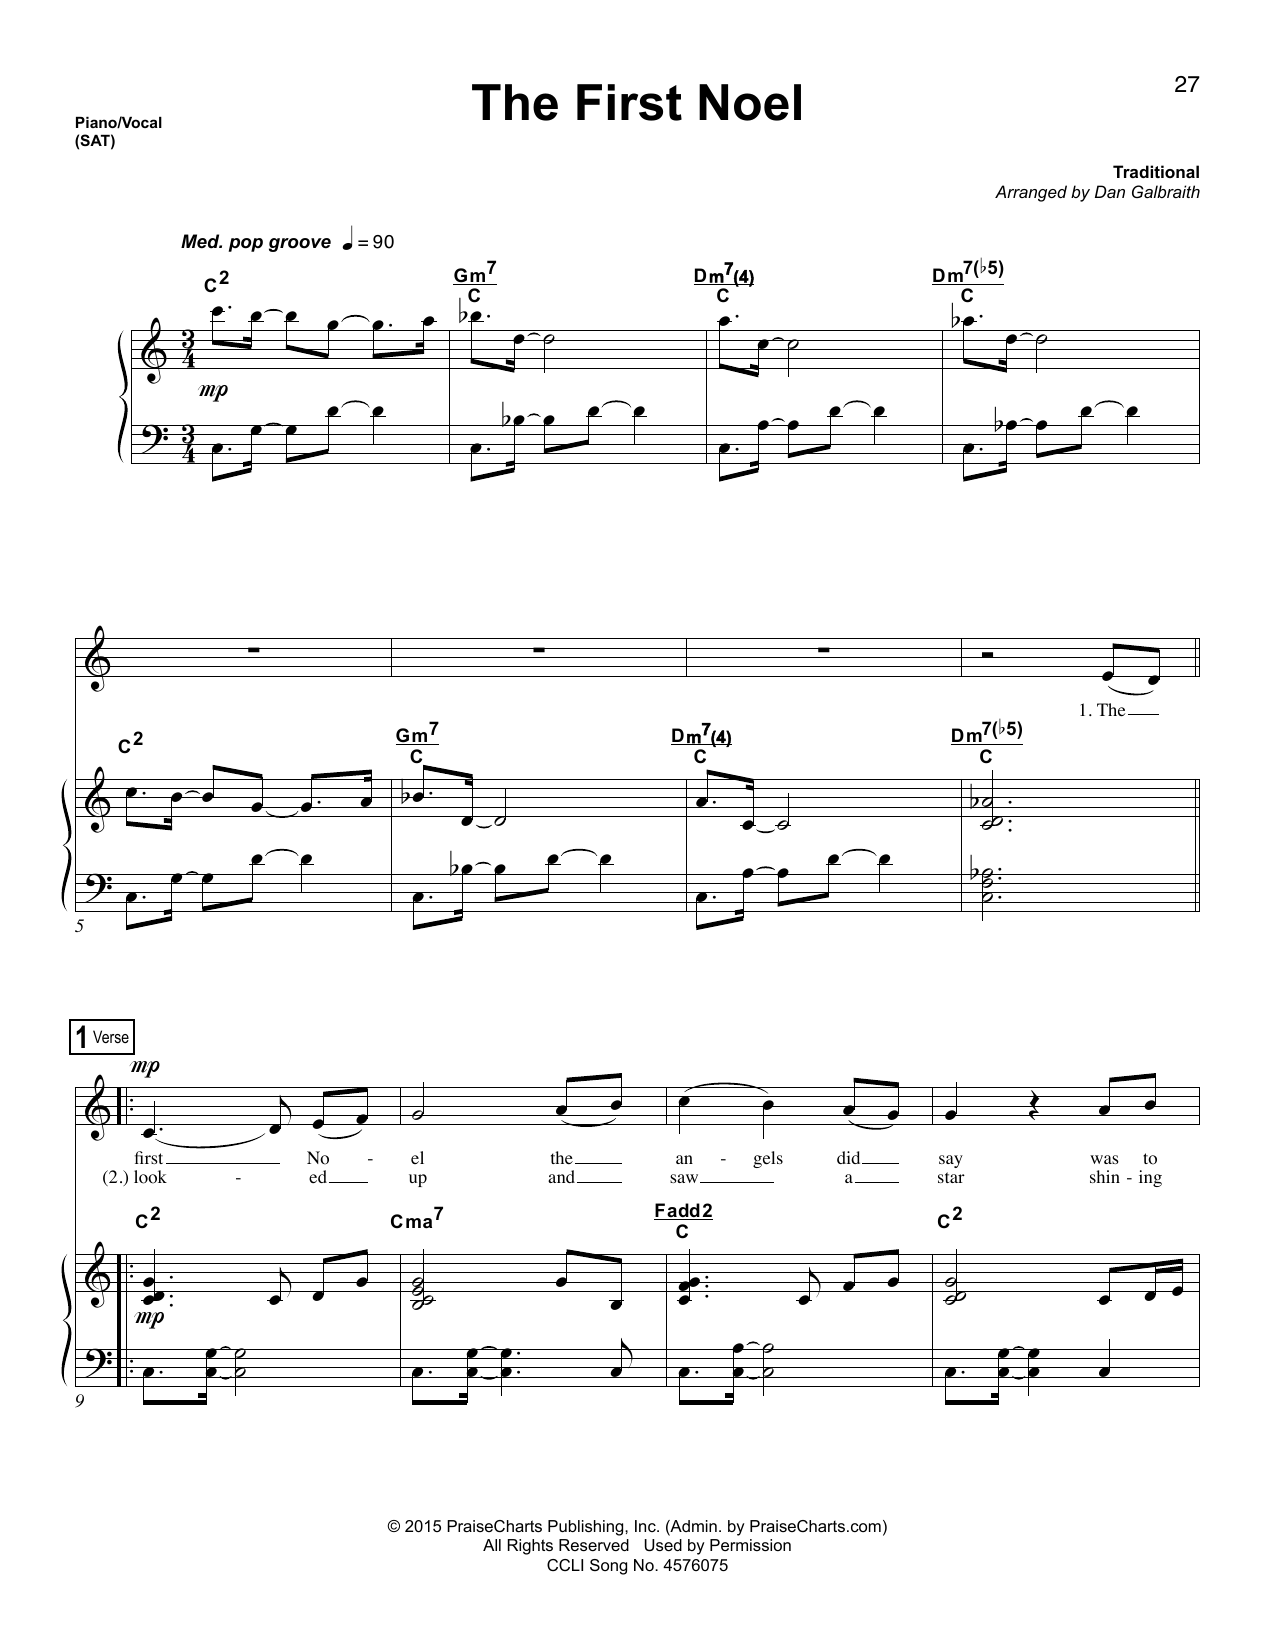 Christmas Carol The First Noel sheet music notes and chords. Download Printable PDF.